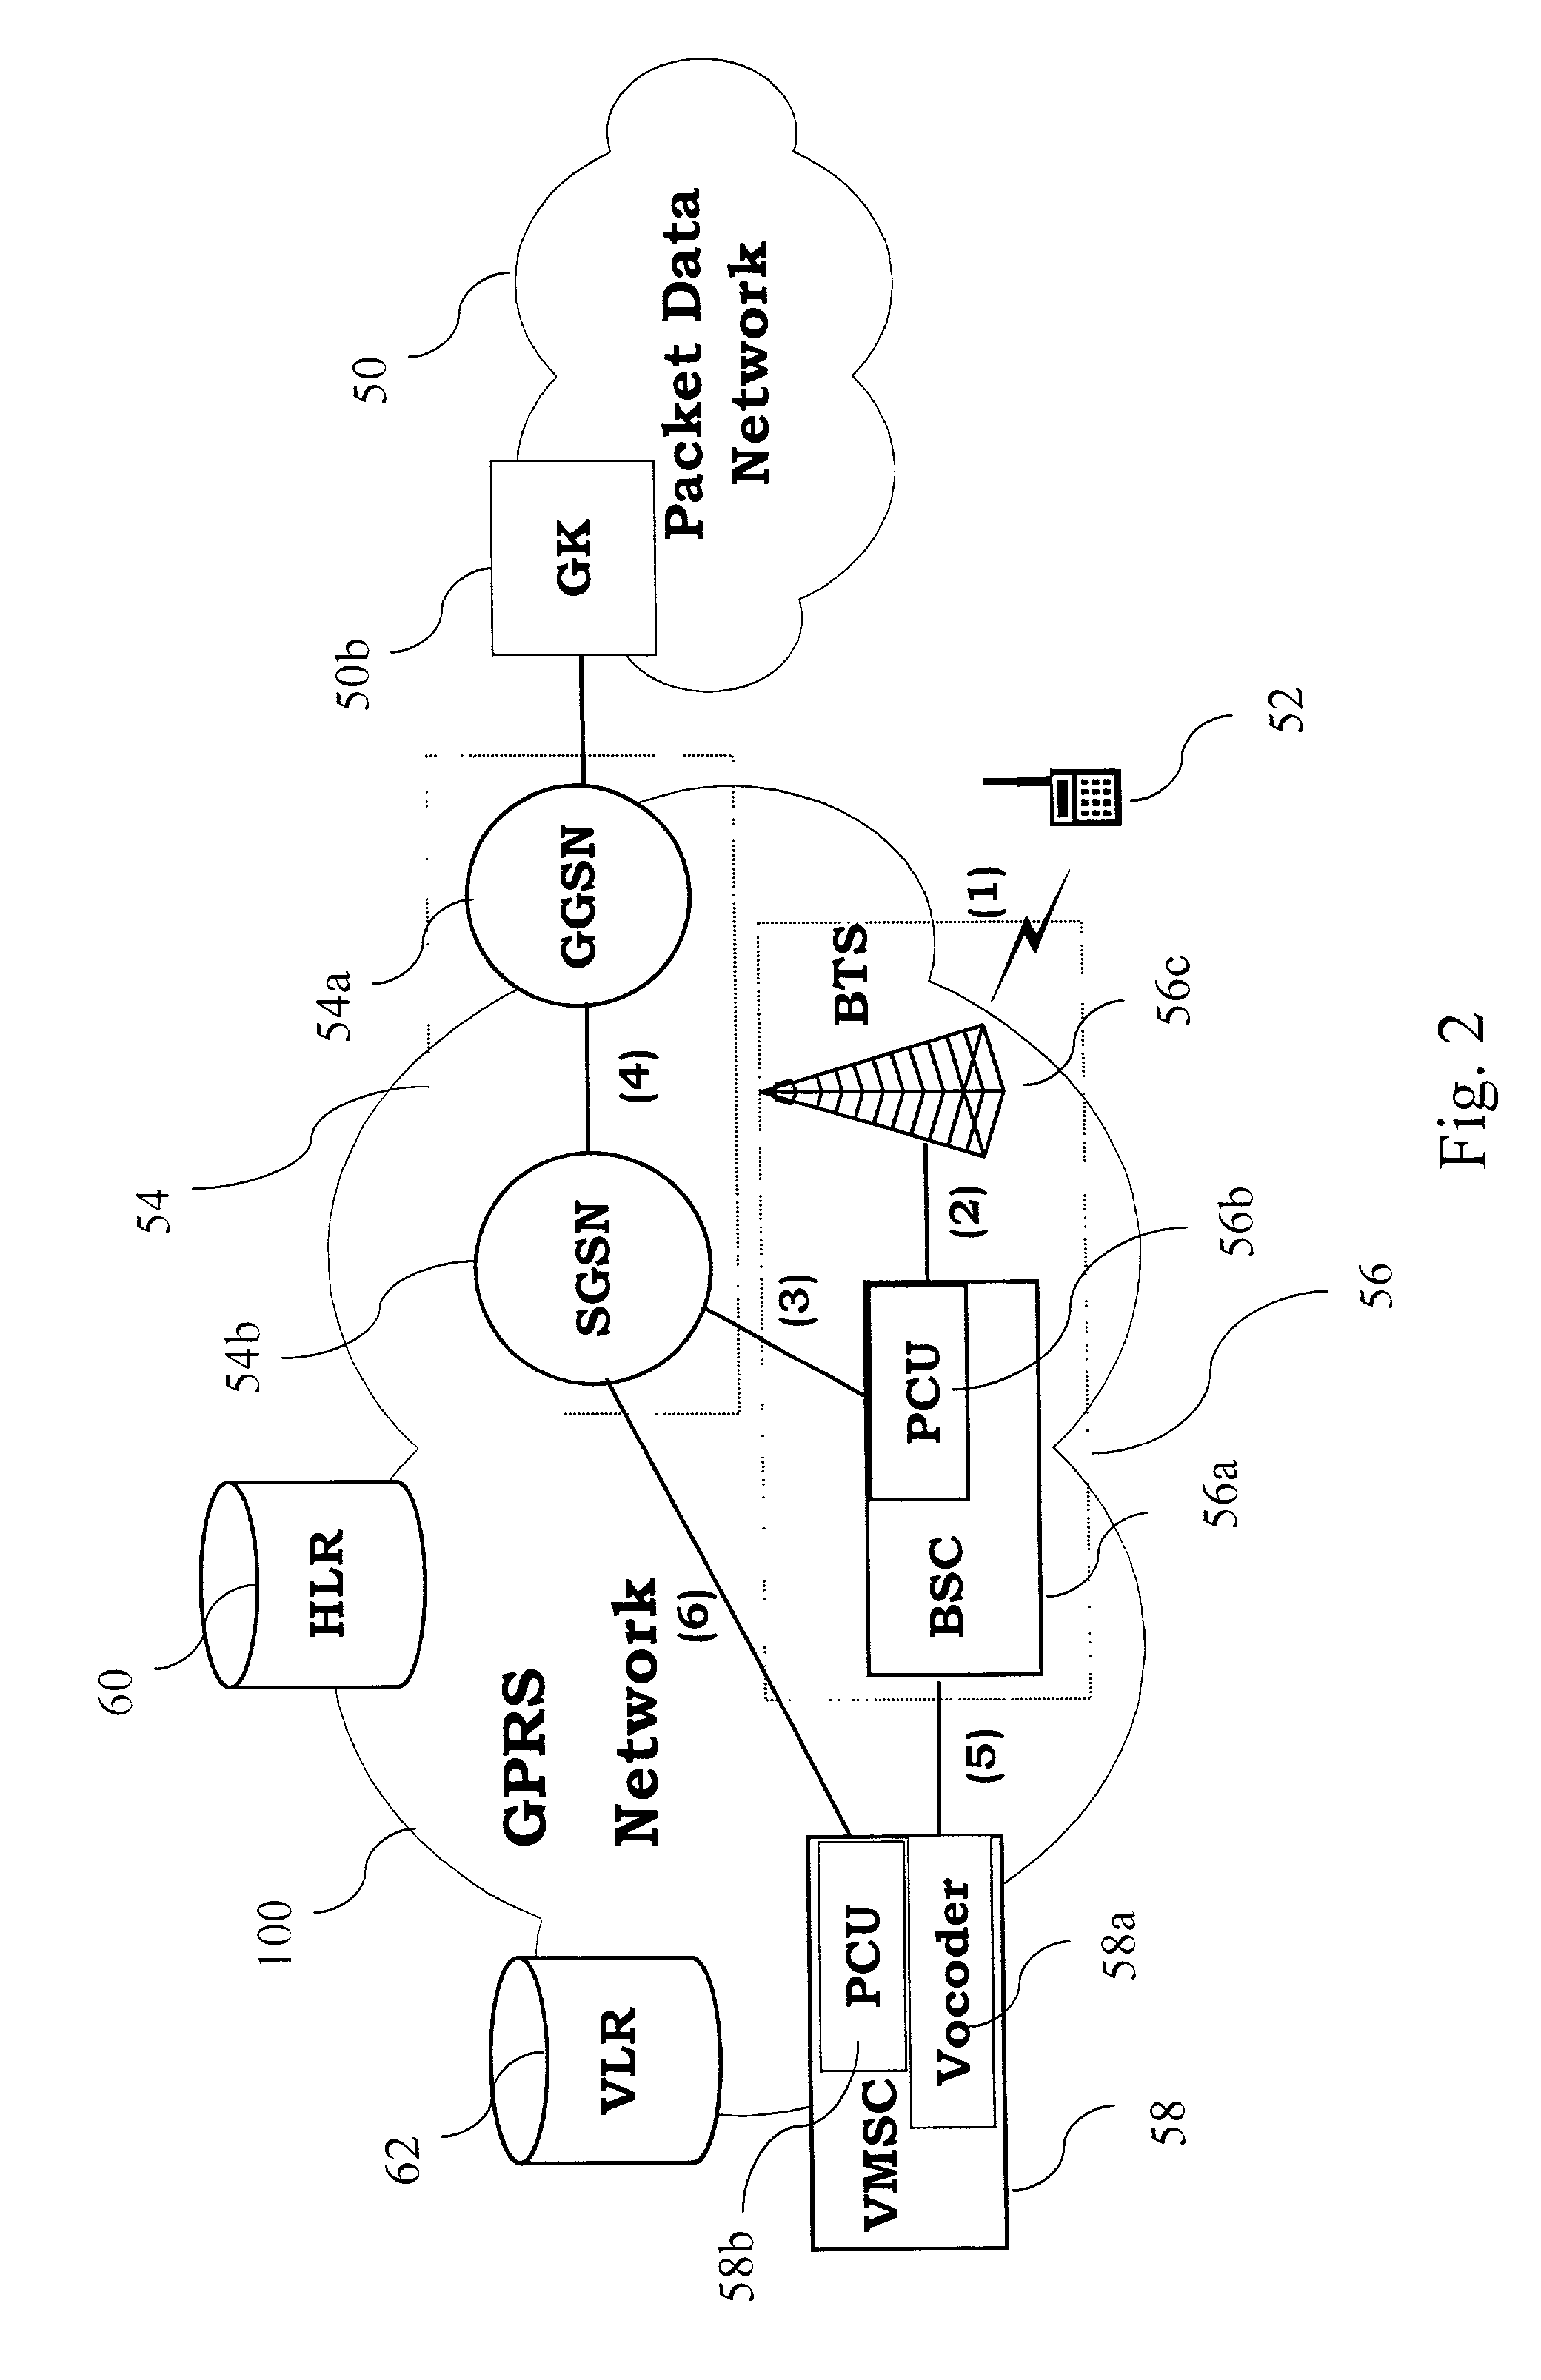 System and method for providing voice communications for radio network